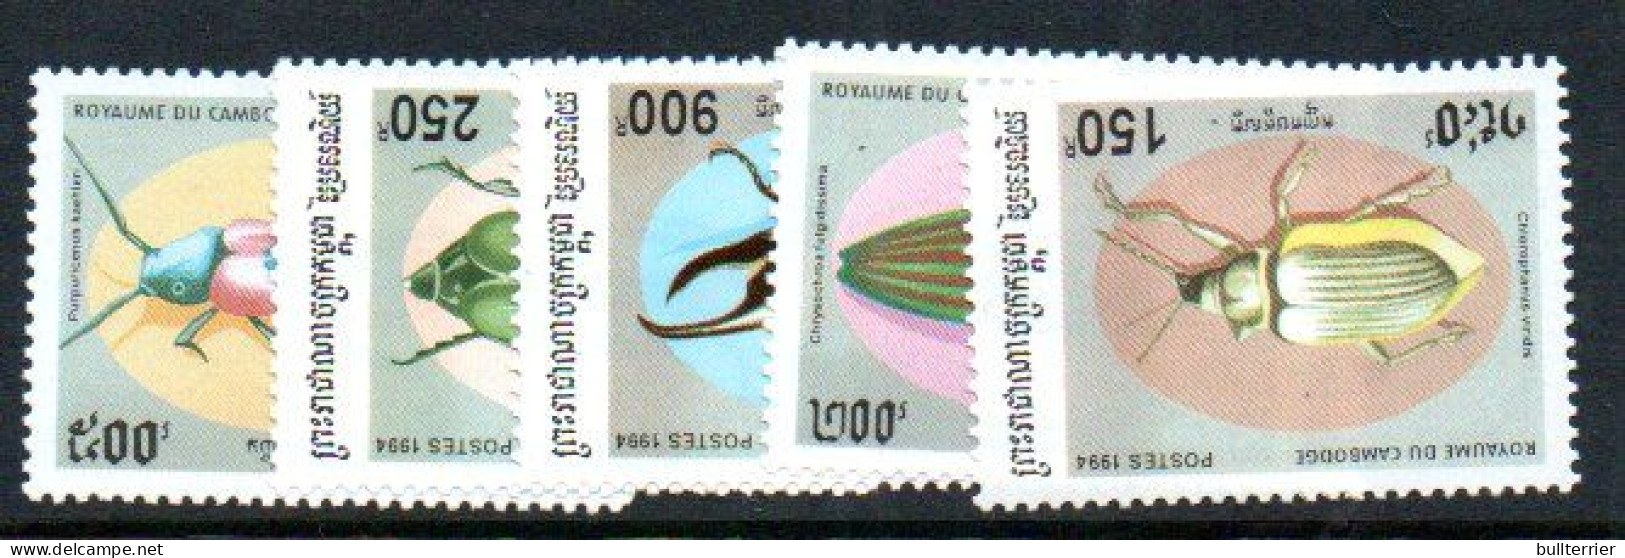 CAMBODIA - 1995 - INSECTS SET OF 5  MINT NEVER HINGED - Cambogia